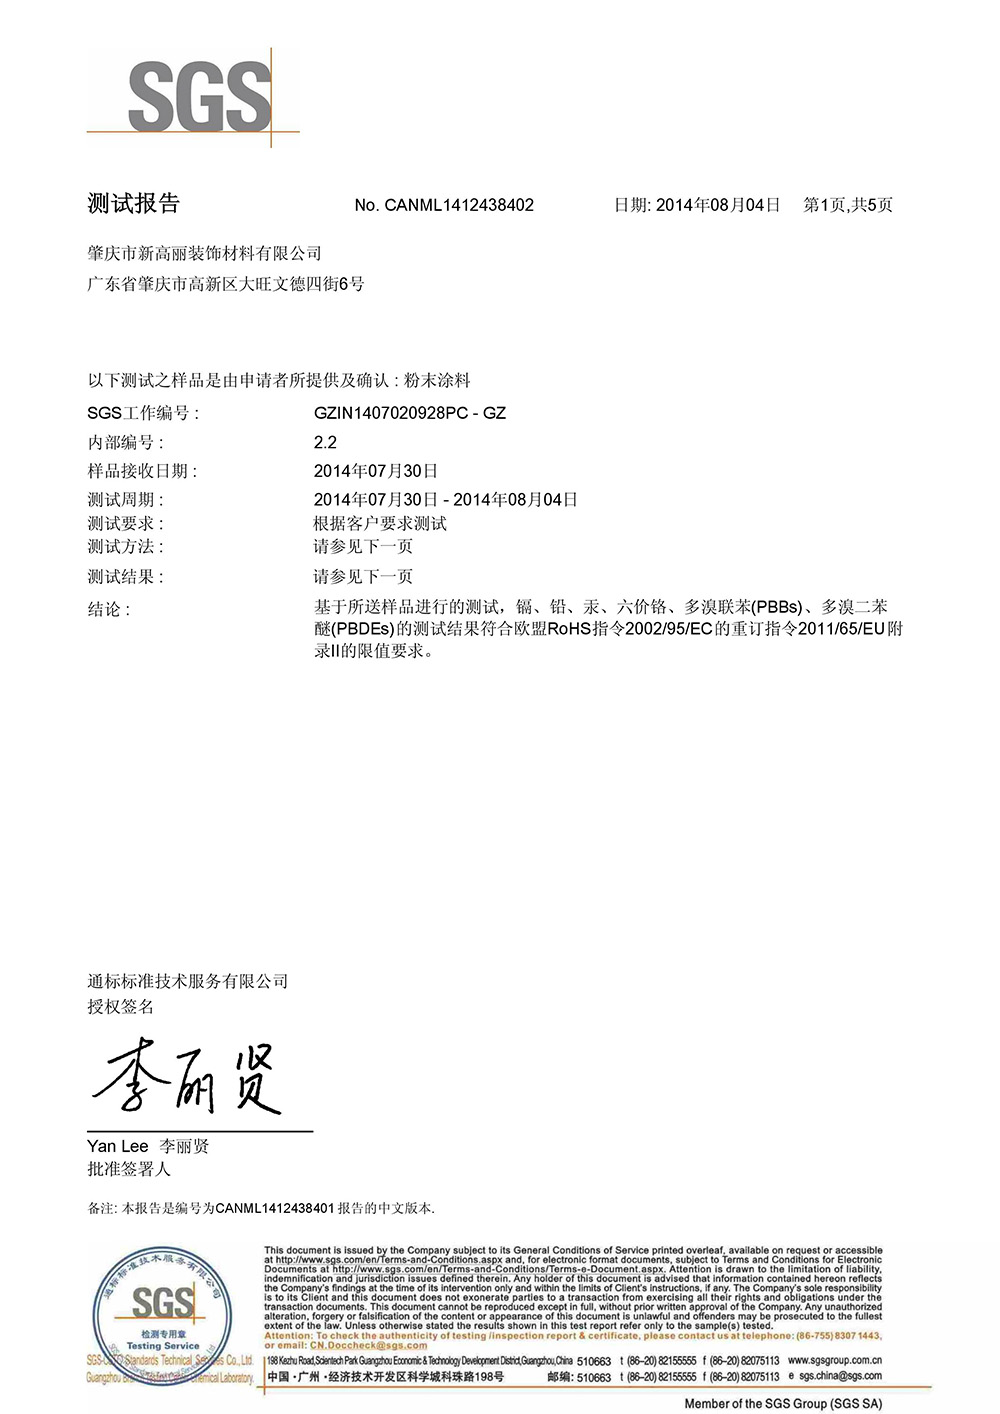 Powder Coating - Chinese SGS Test Report (1)